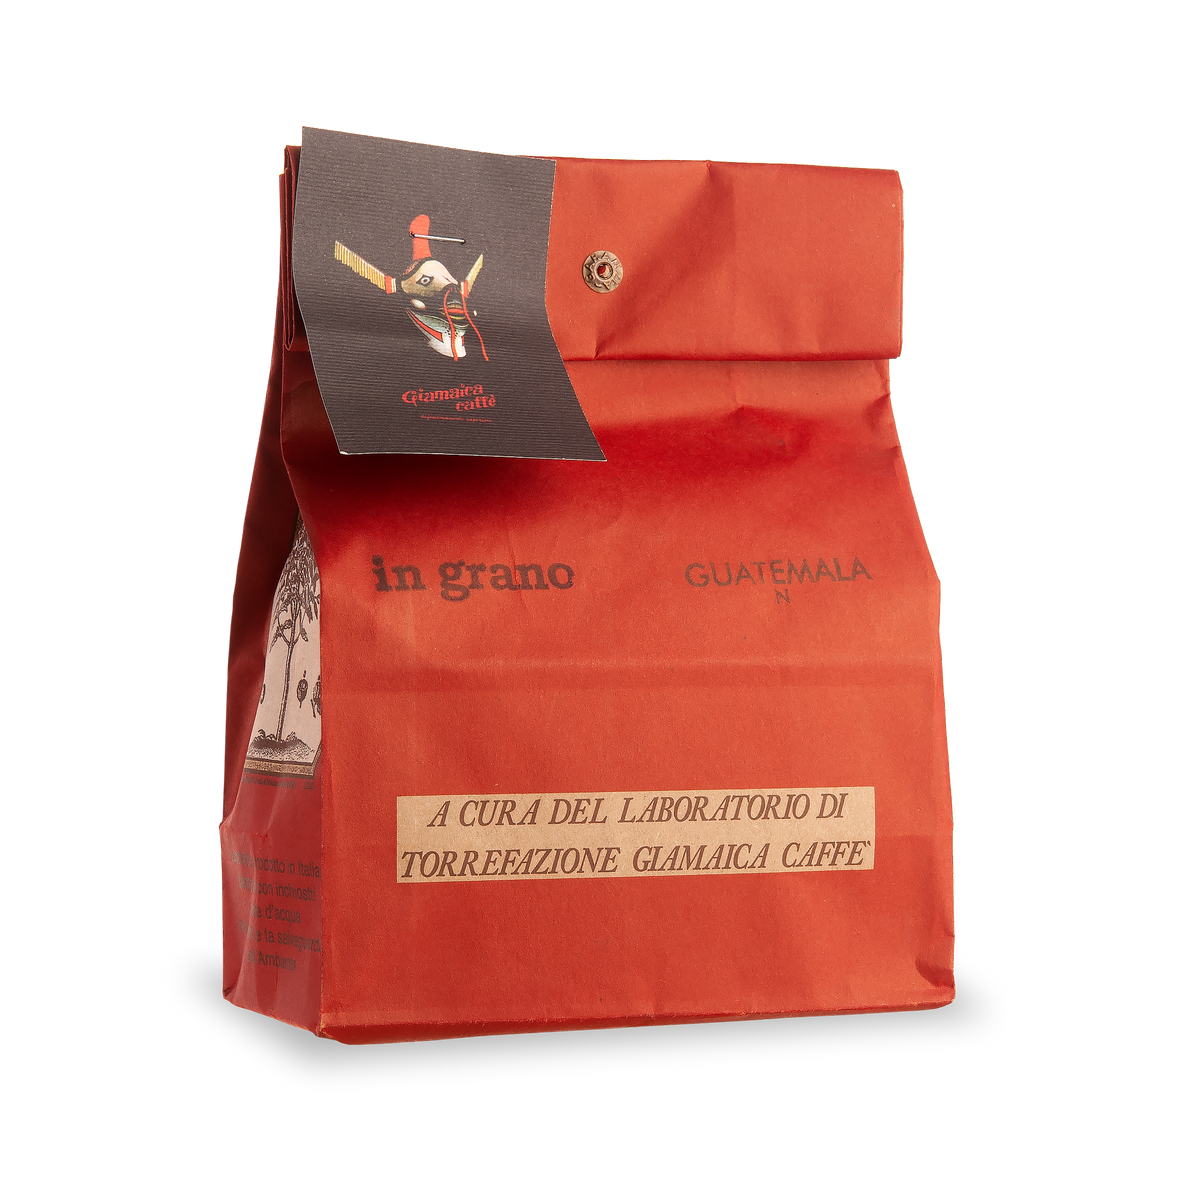 Coffee Guatemala Moka Grind 4 X 250g - PRE-ORDER - Contact us for further information (indulge@flemmings.wine)